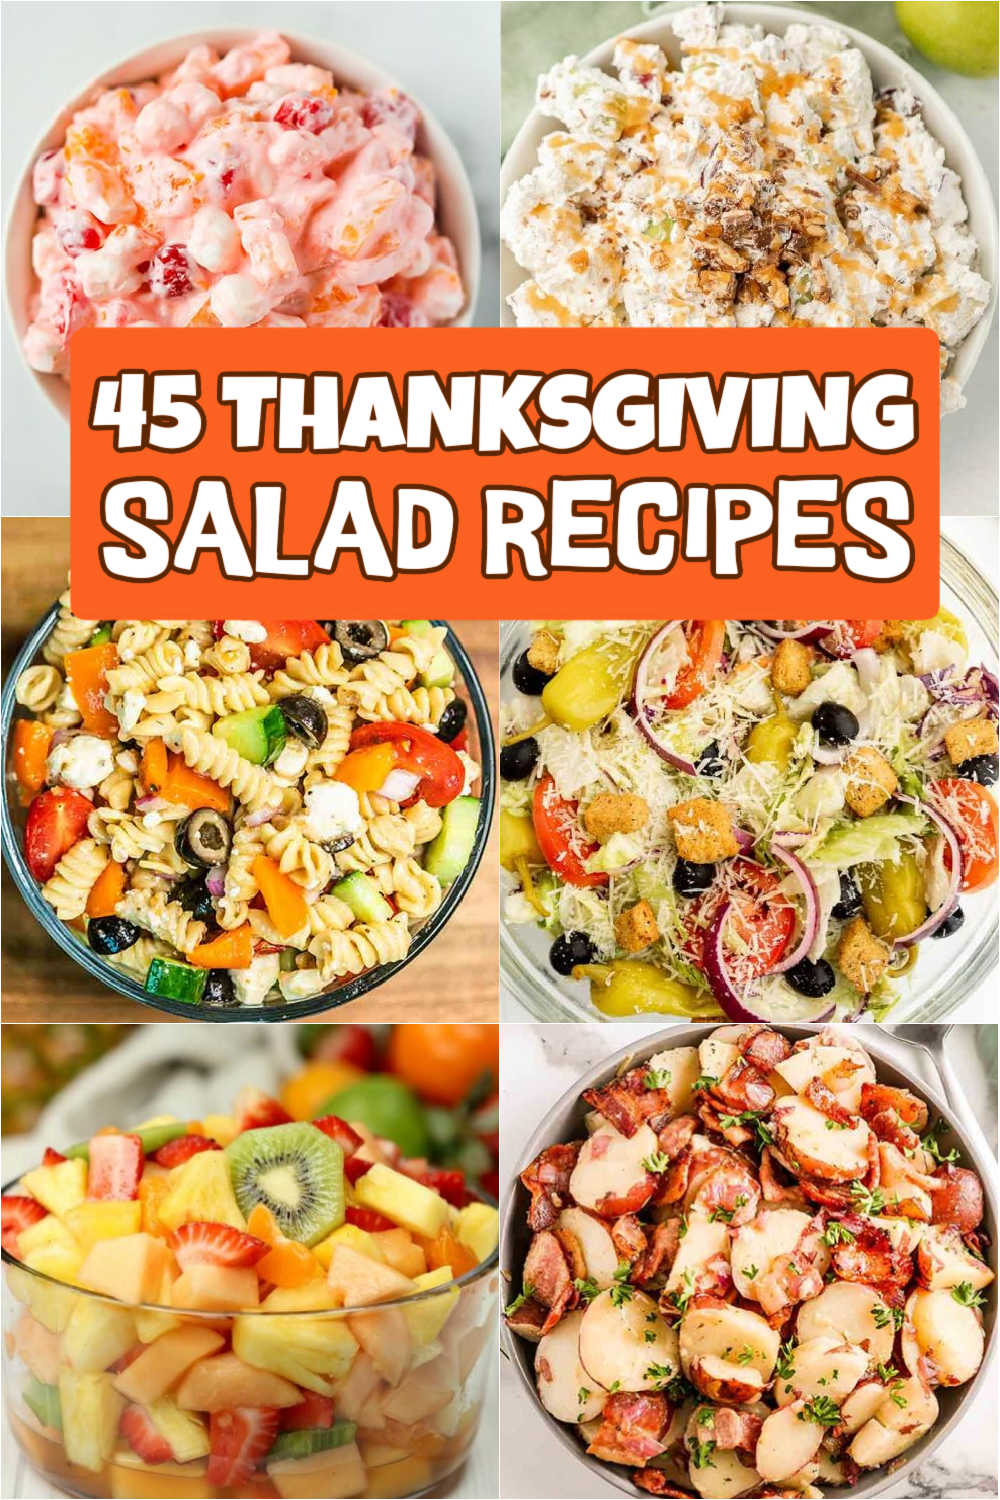 45 Best Thanksgiving Salad Recipes - Eating on a Dime